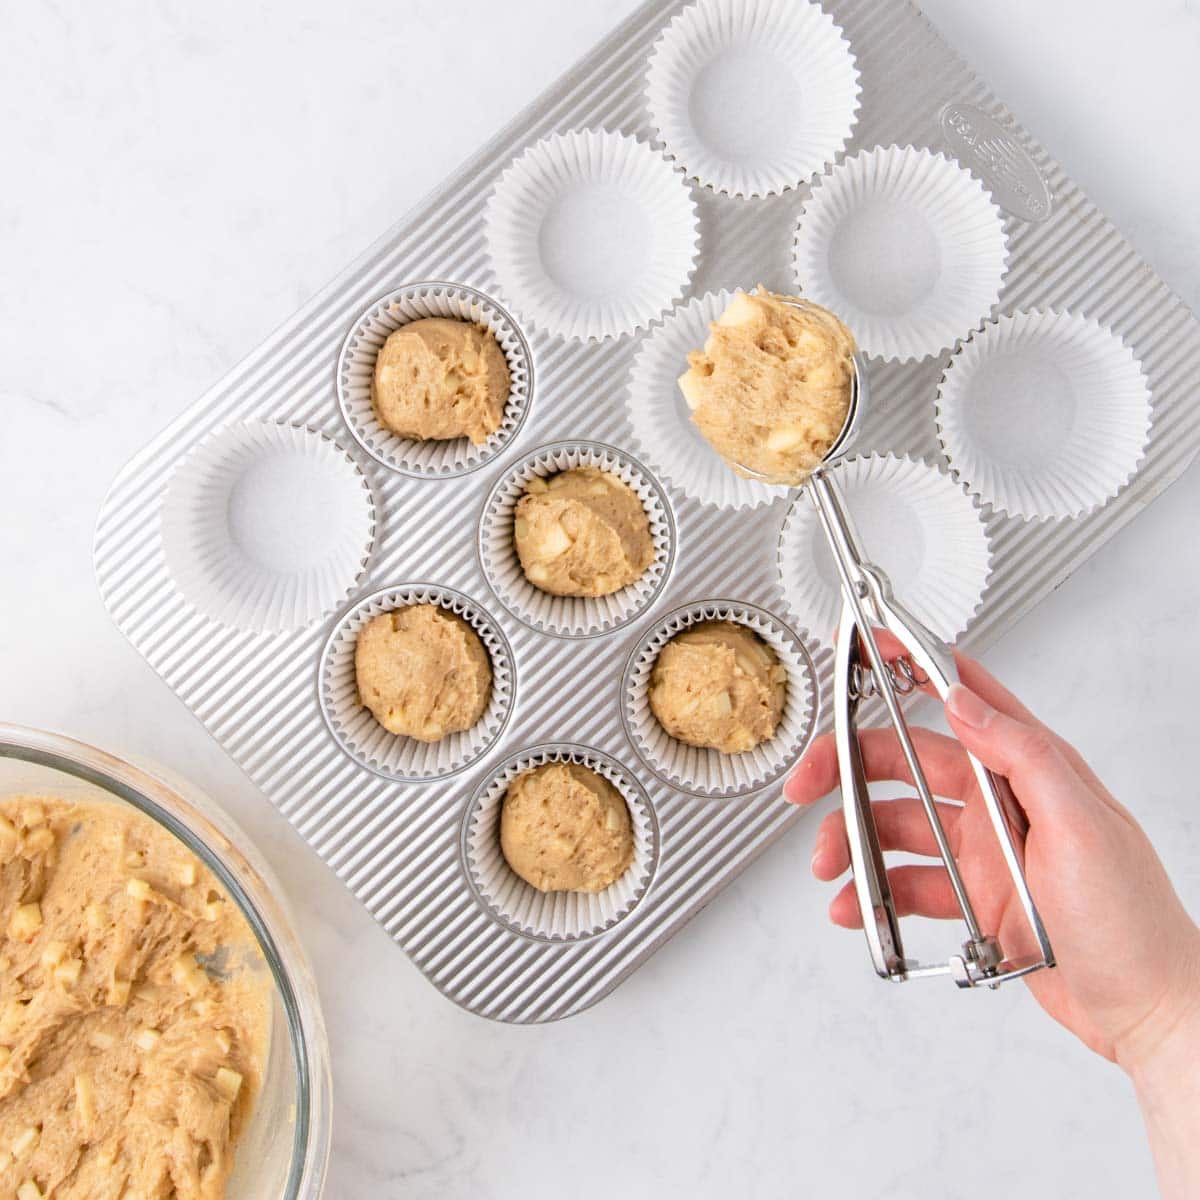 The muffin batter being spooned into the muffin tin using a large cookie scoop.